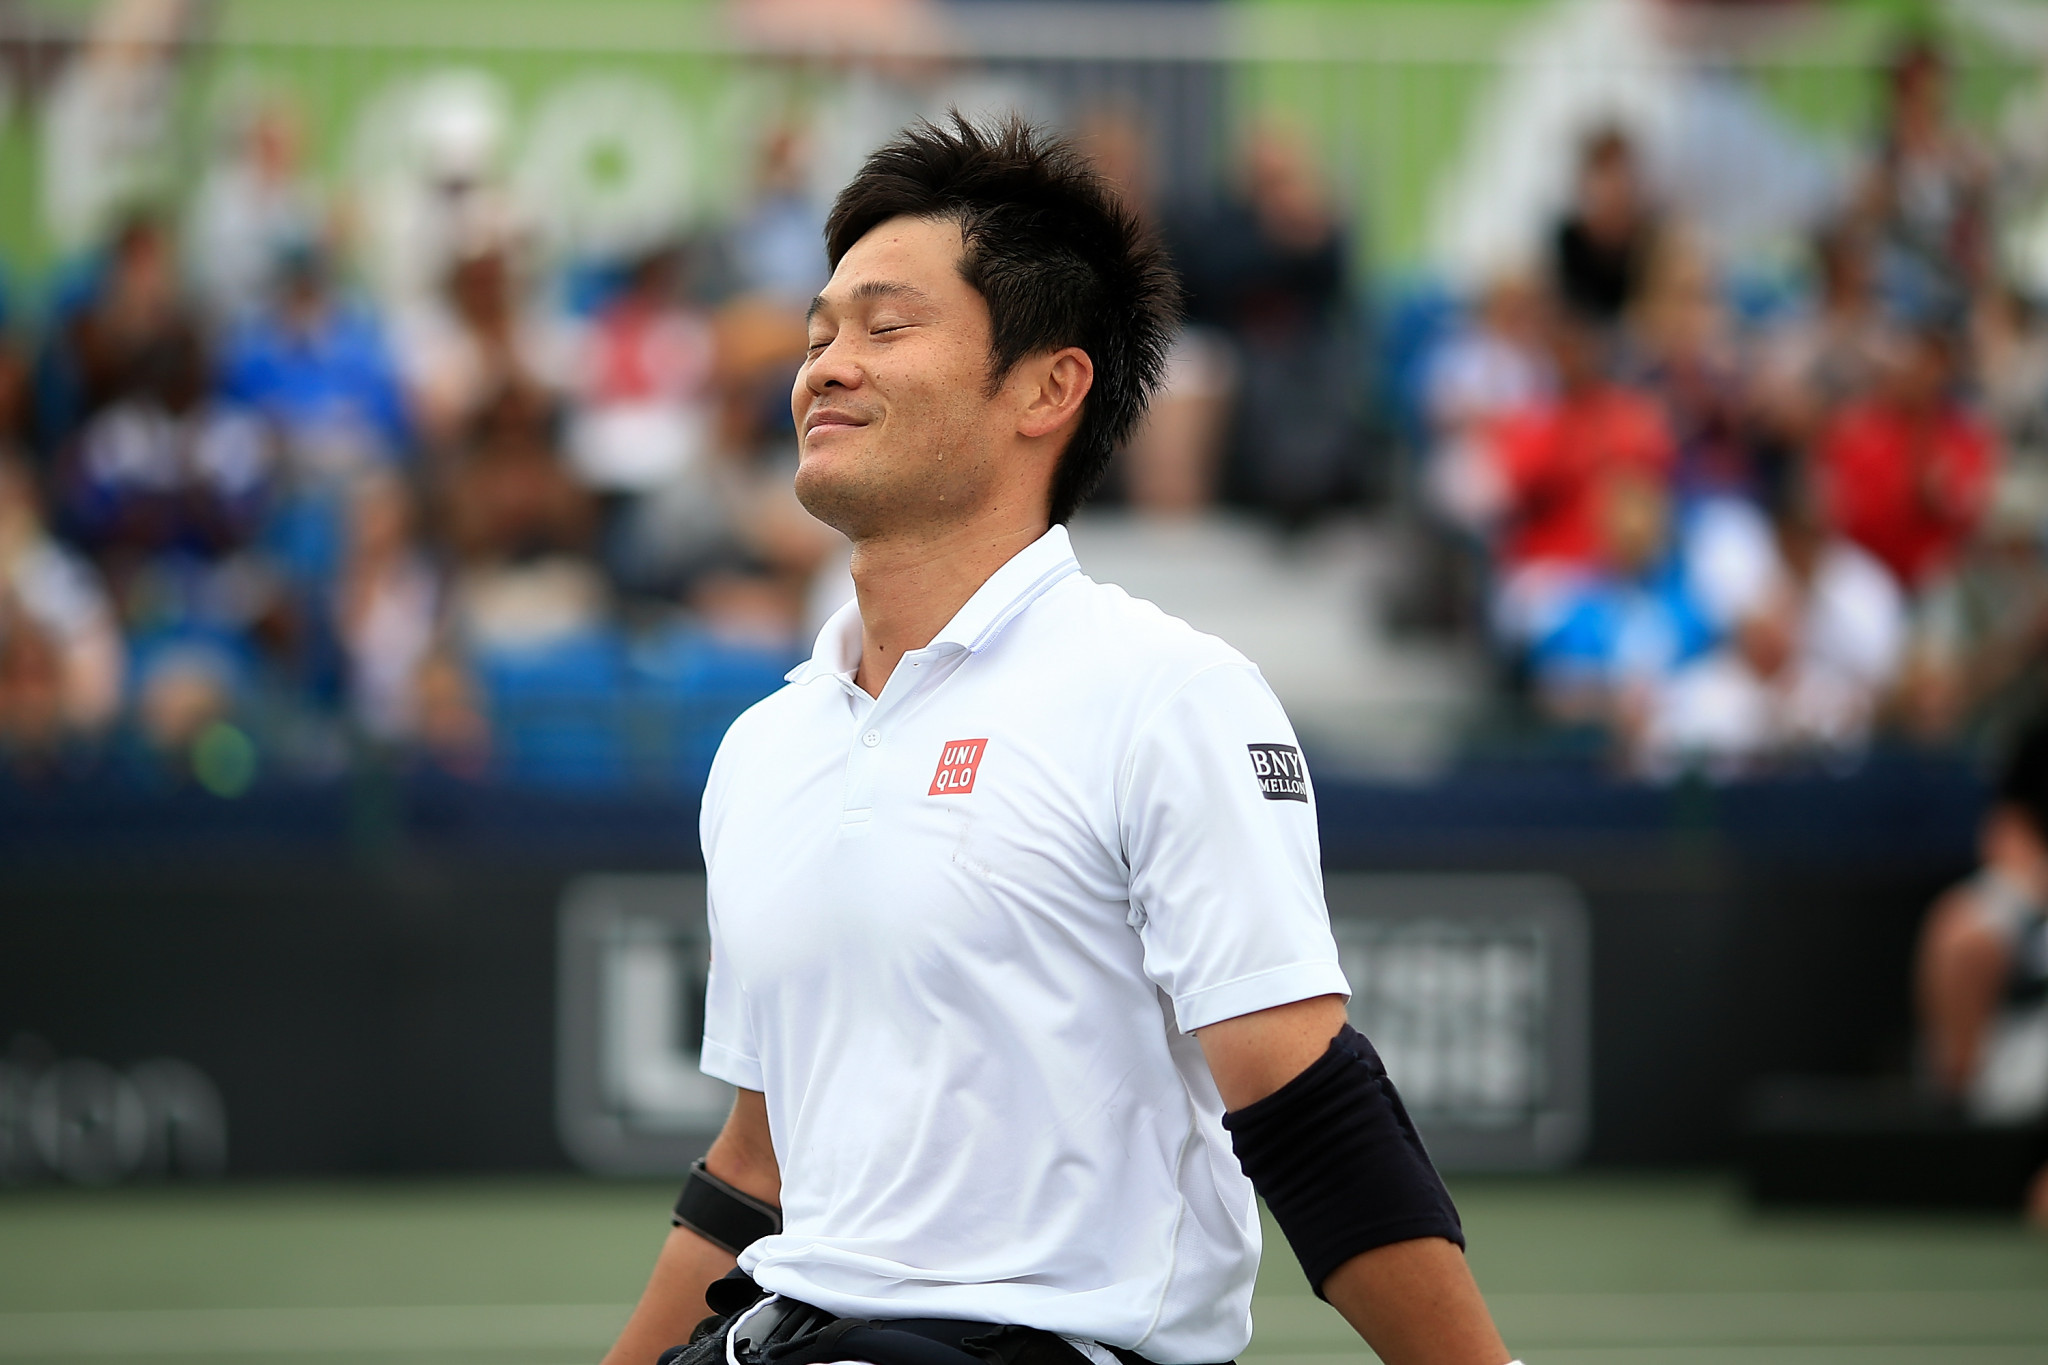 Shingo Kunieda came from a set down to reach the men's singles semi-finals ©Getty Images